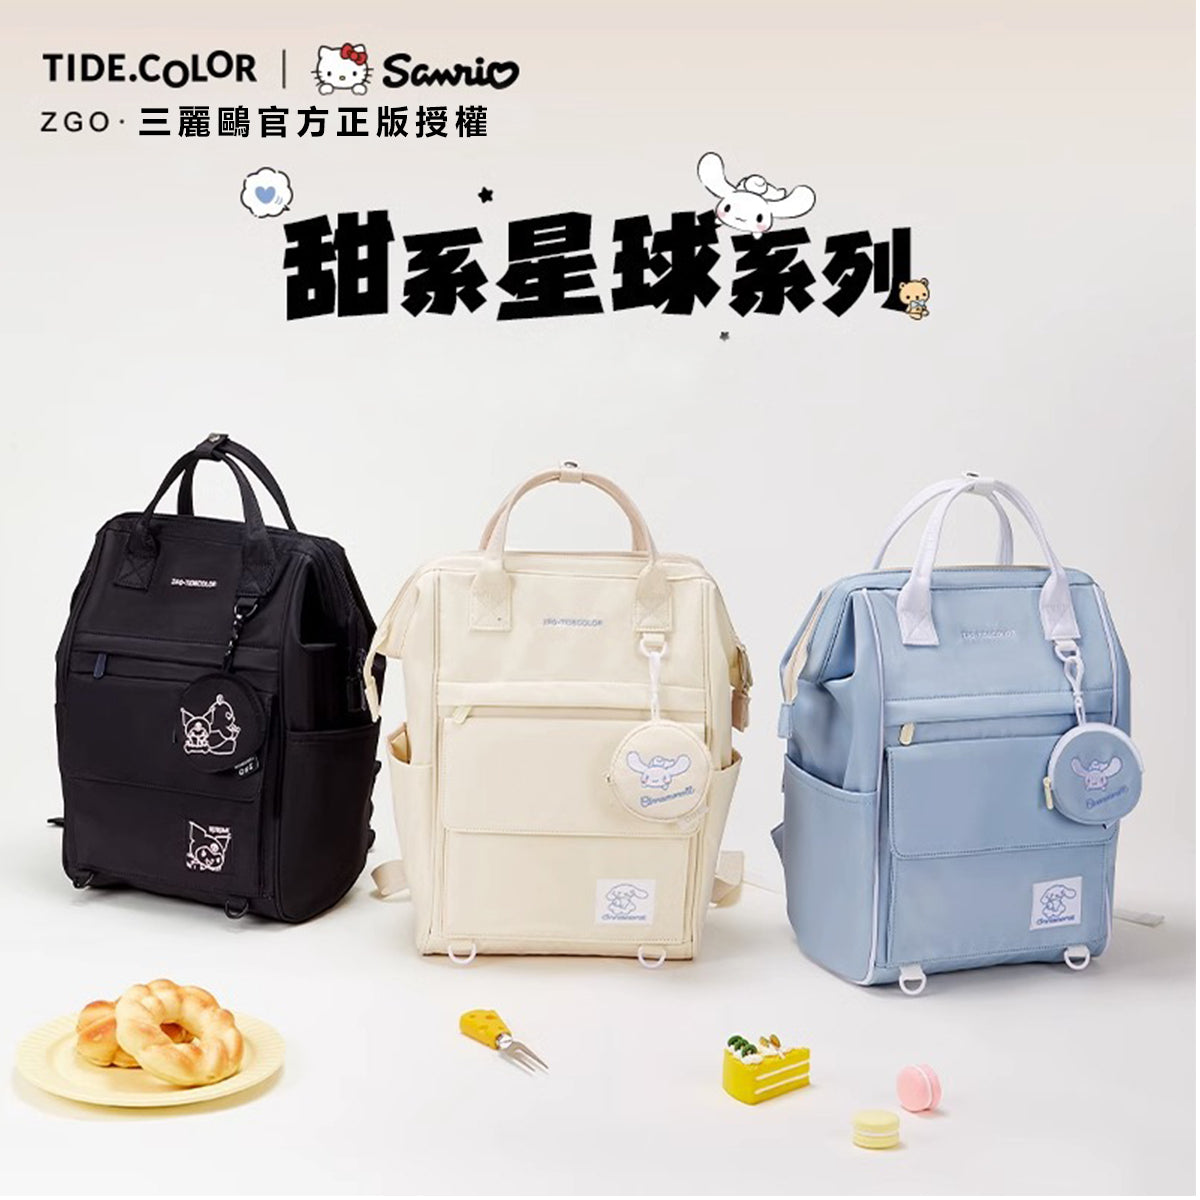 Backpack with Coin Bag - ZGO x Sanrio Crossover